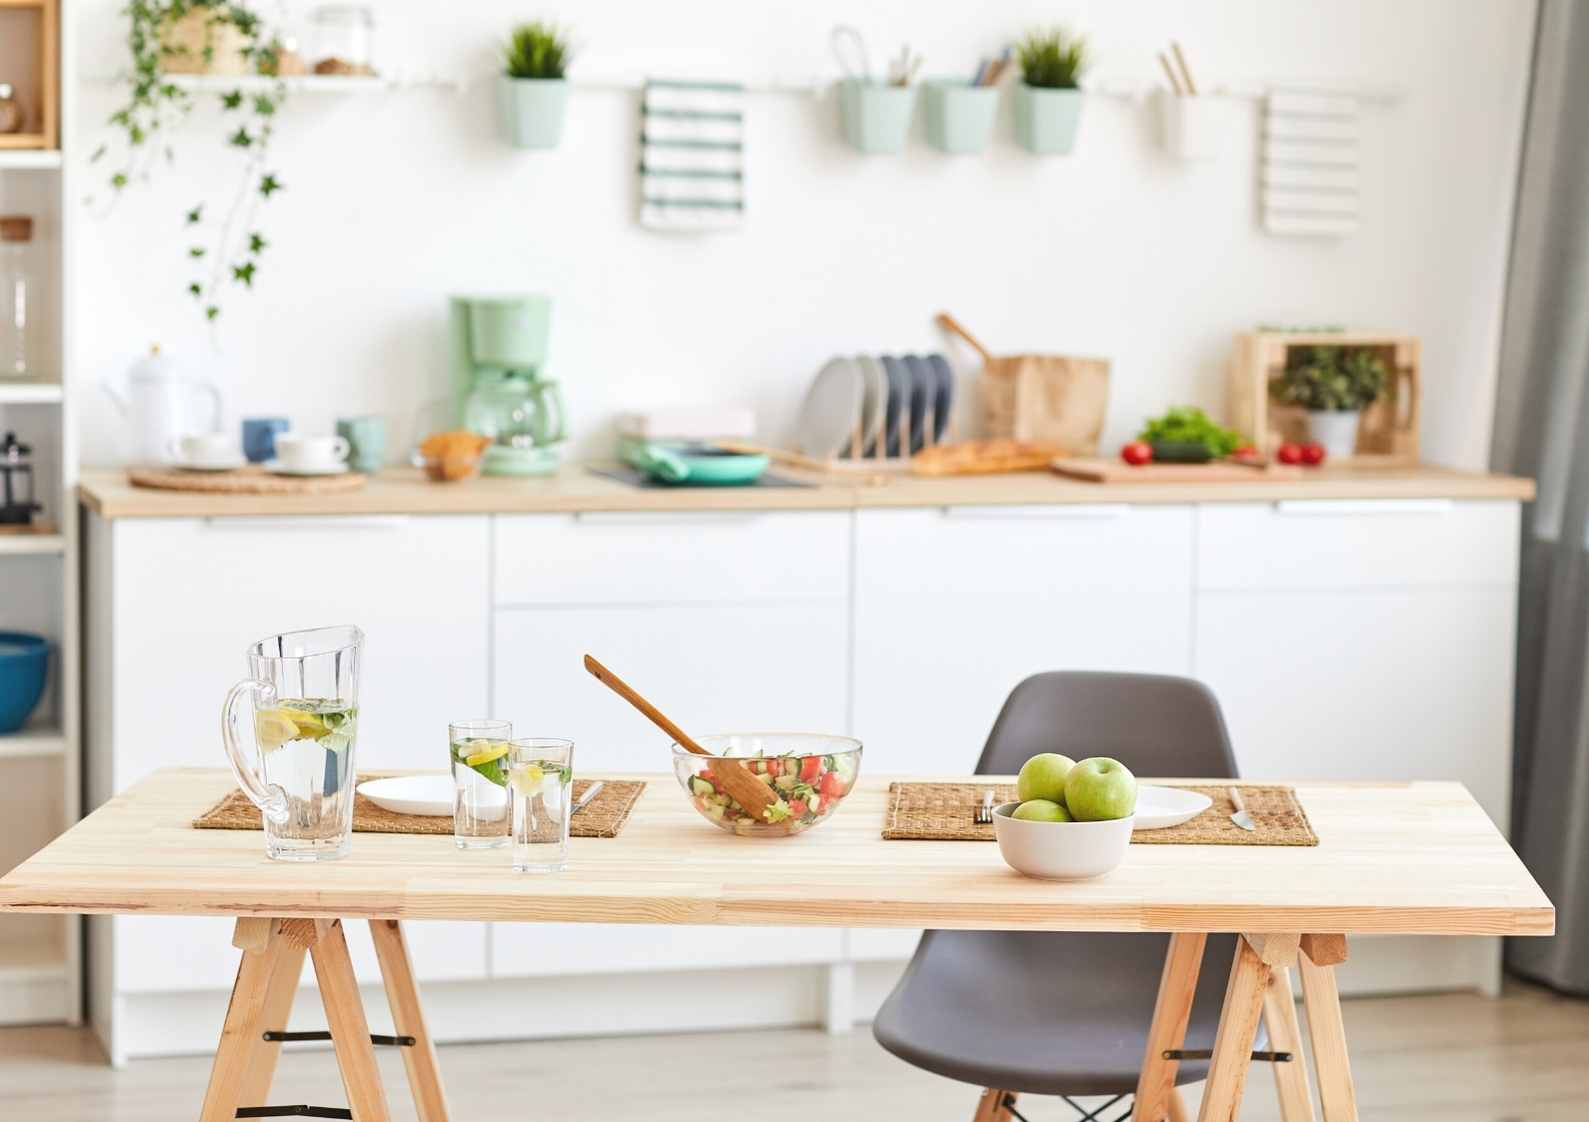 Make Your Home Look More Lived In, cozy kitchen